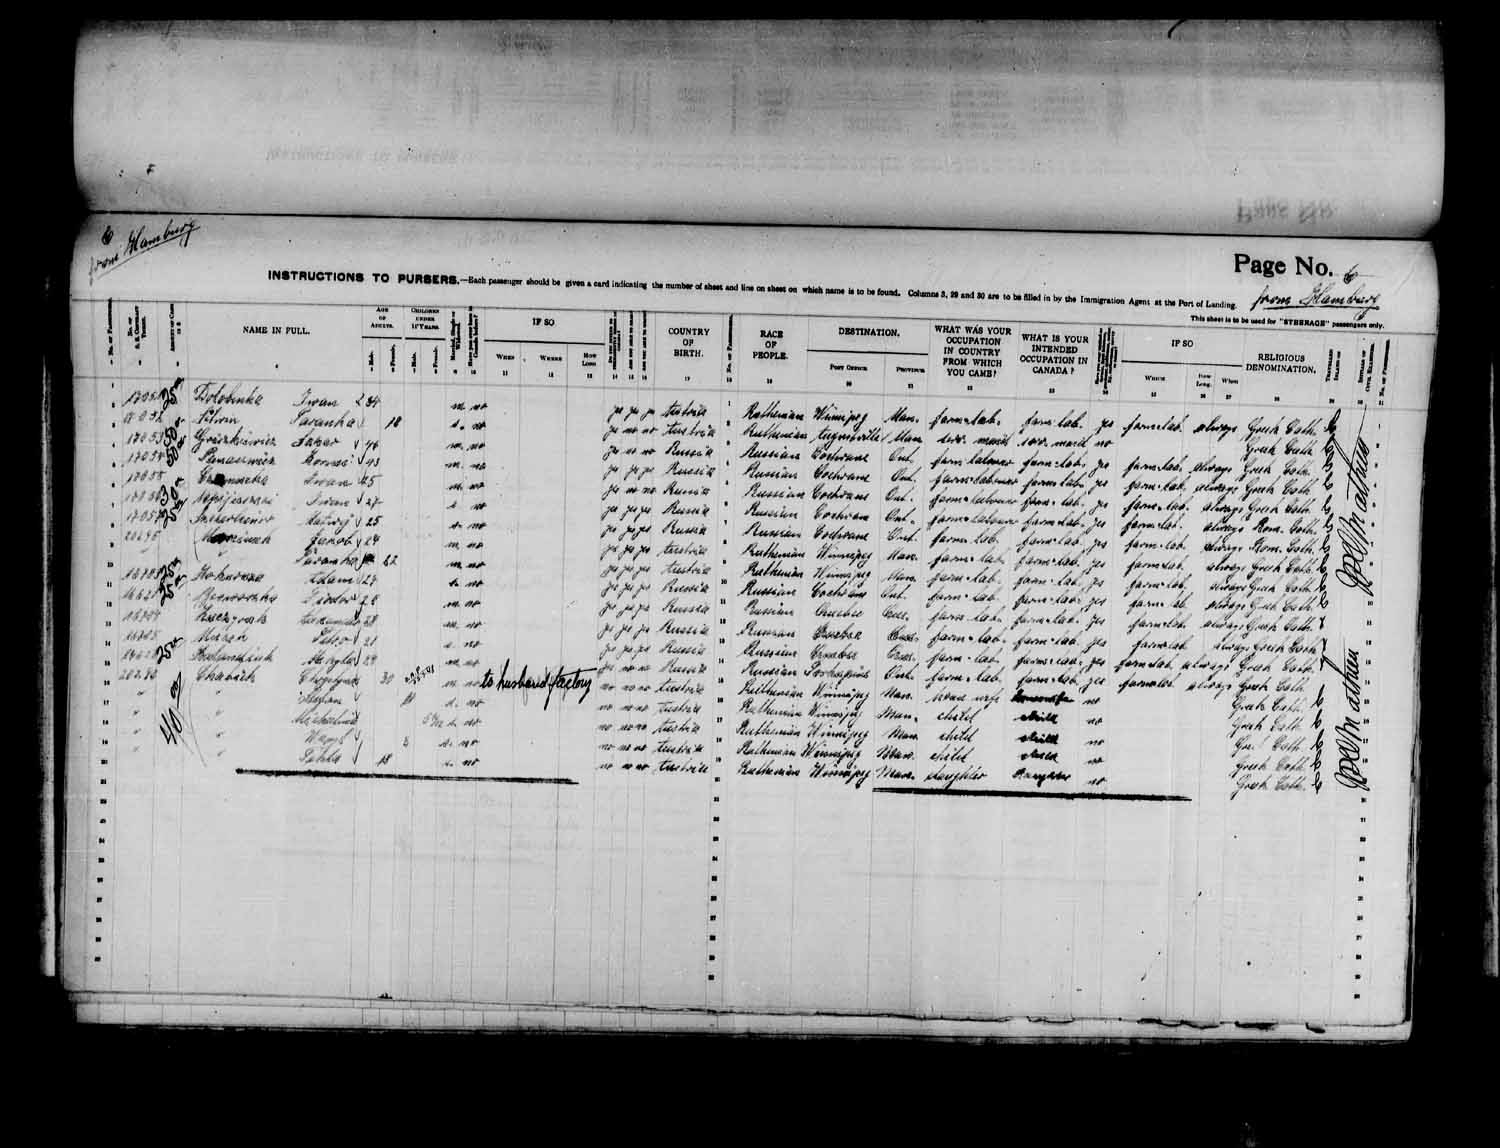 Digitized page of Passenger Lists for Image No.: e003575018